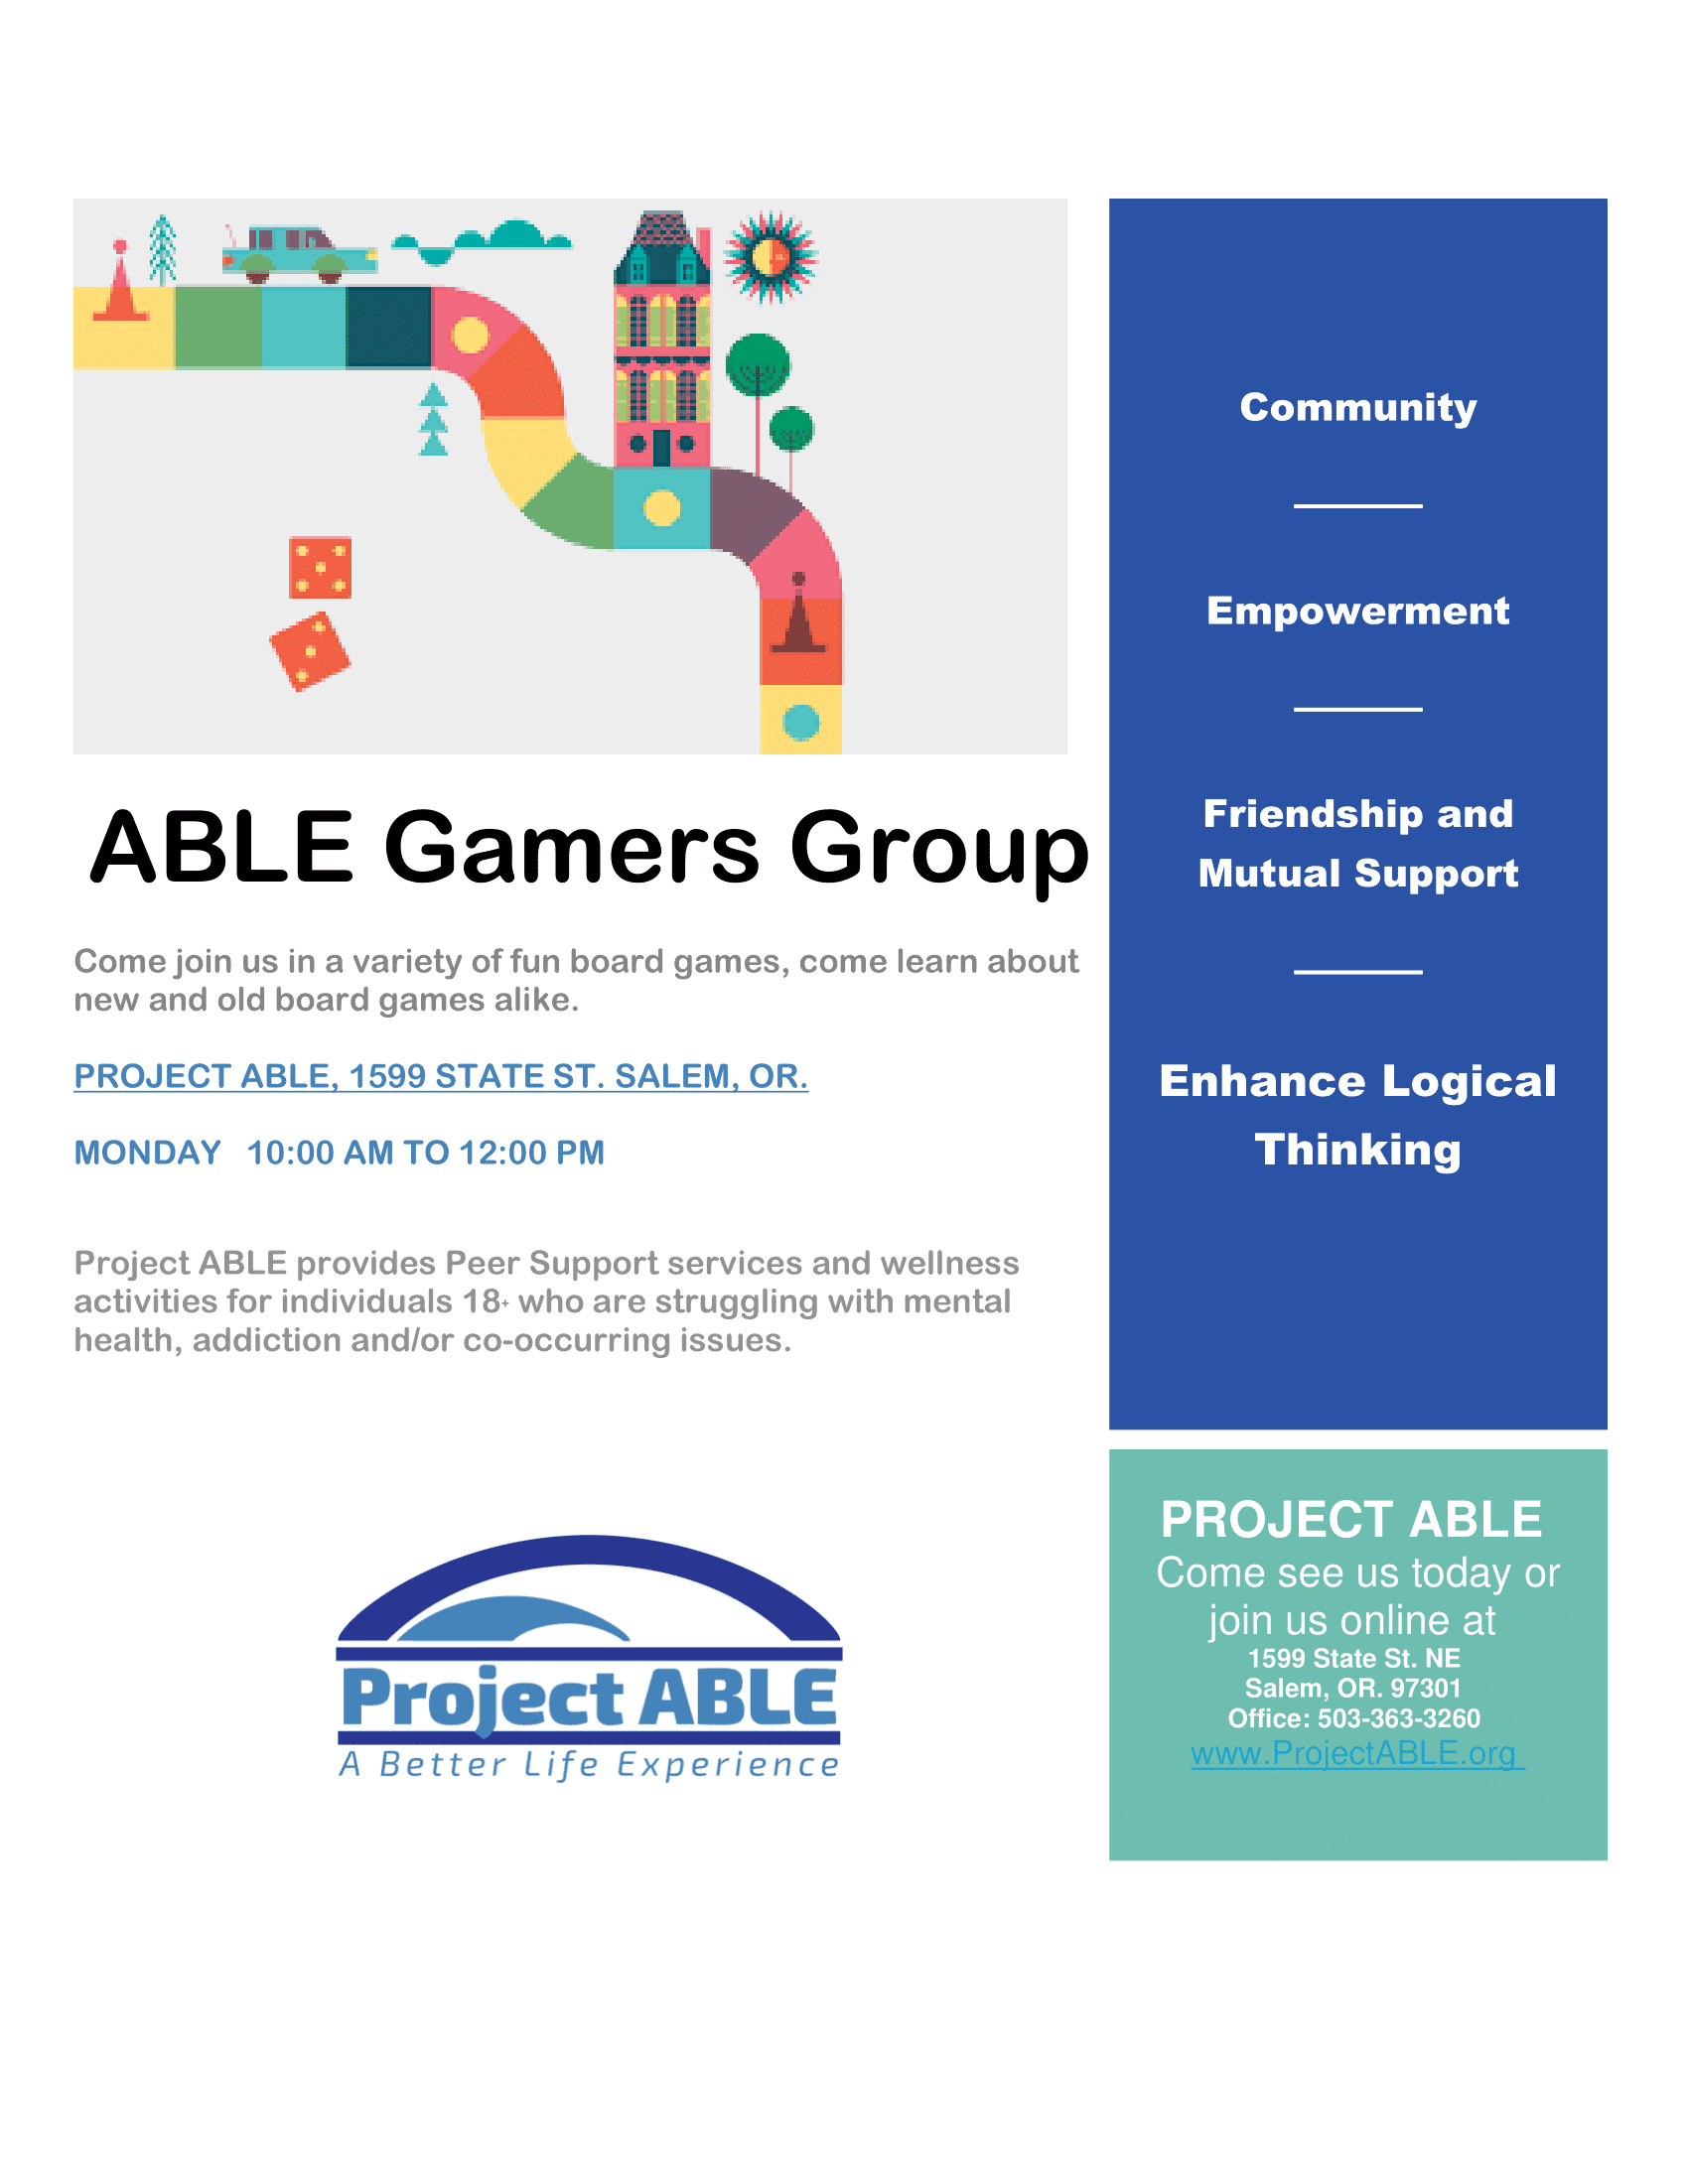 ABLE Gamers Group